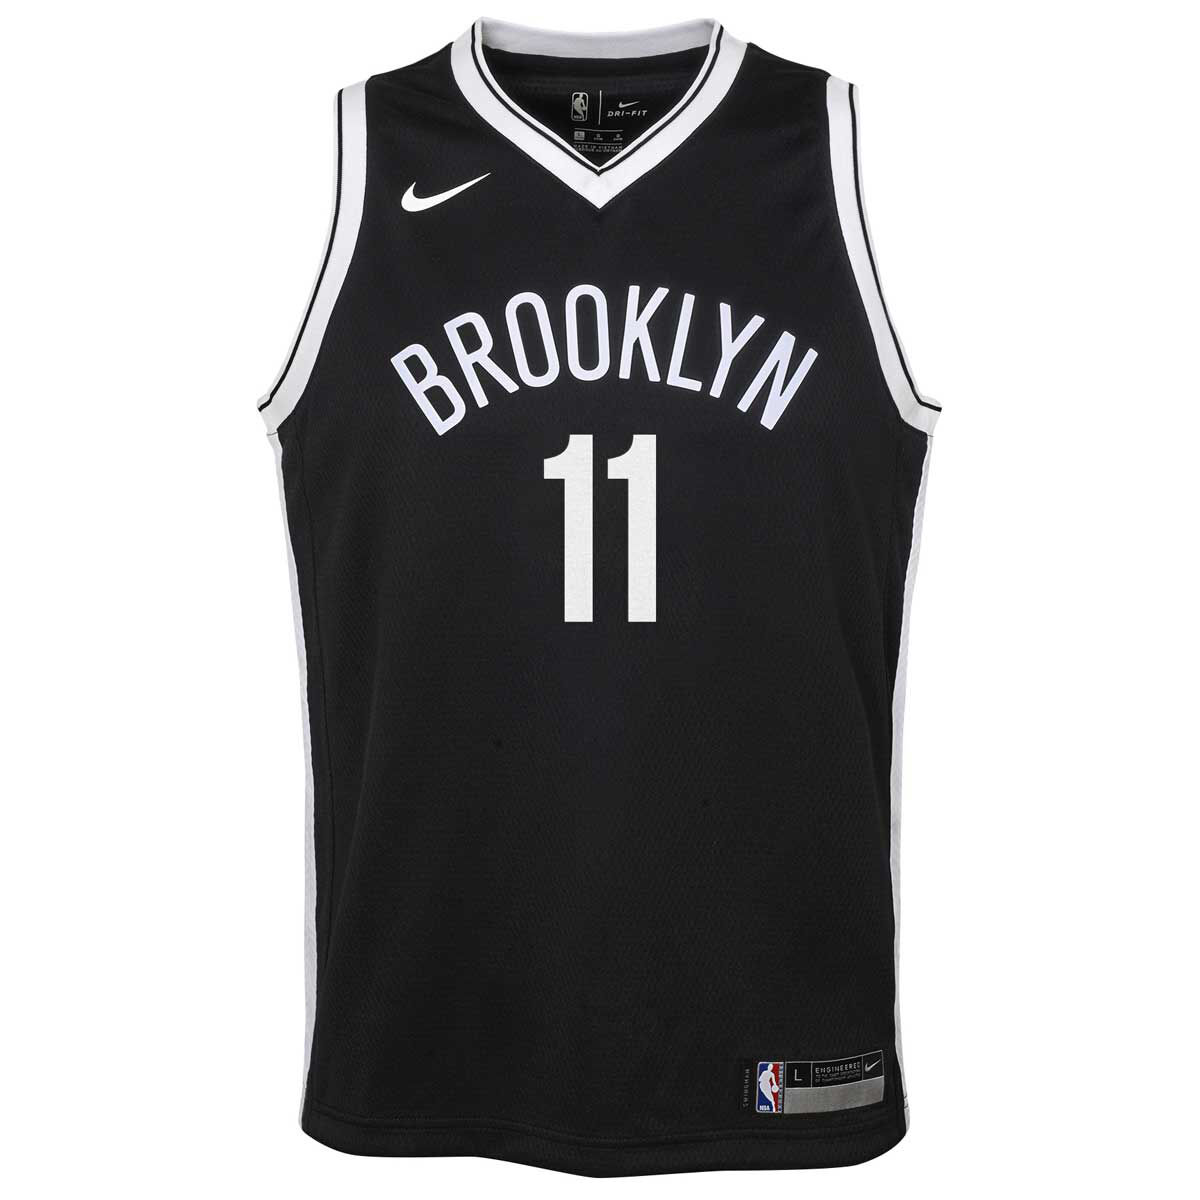 white kyrie irving jersey